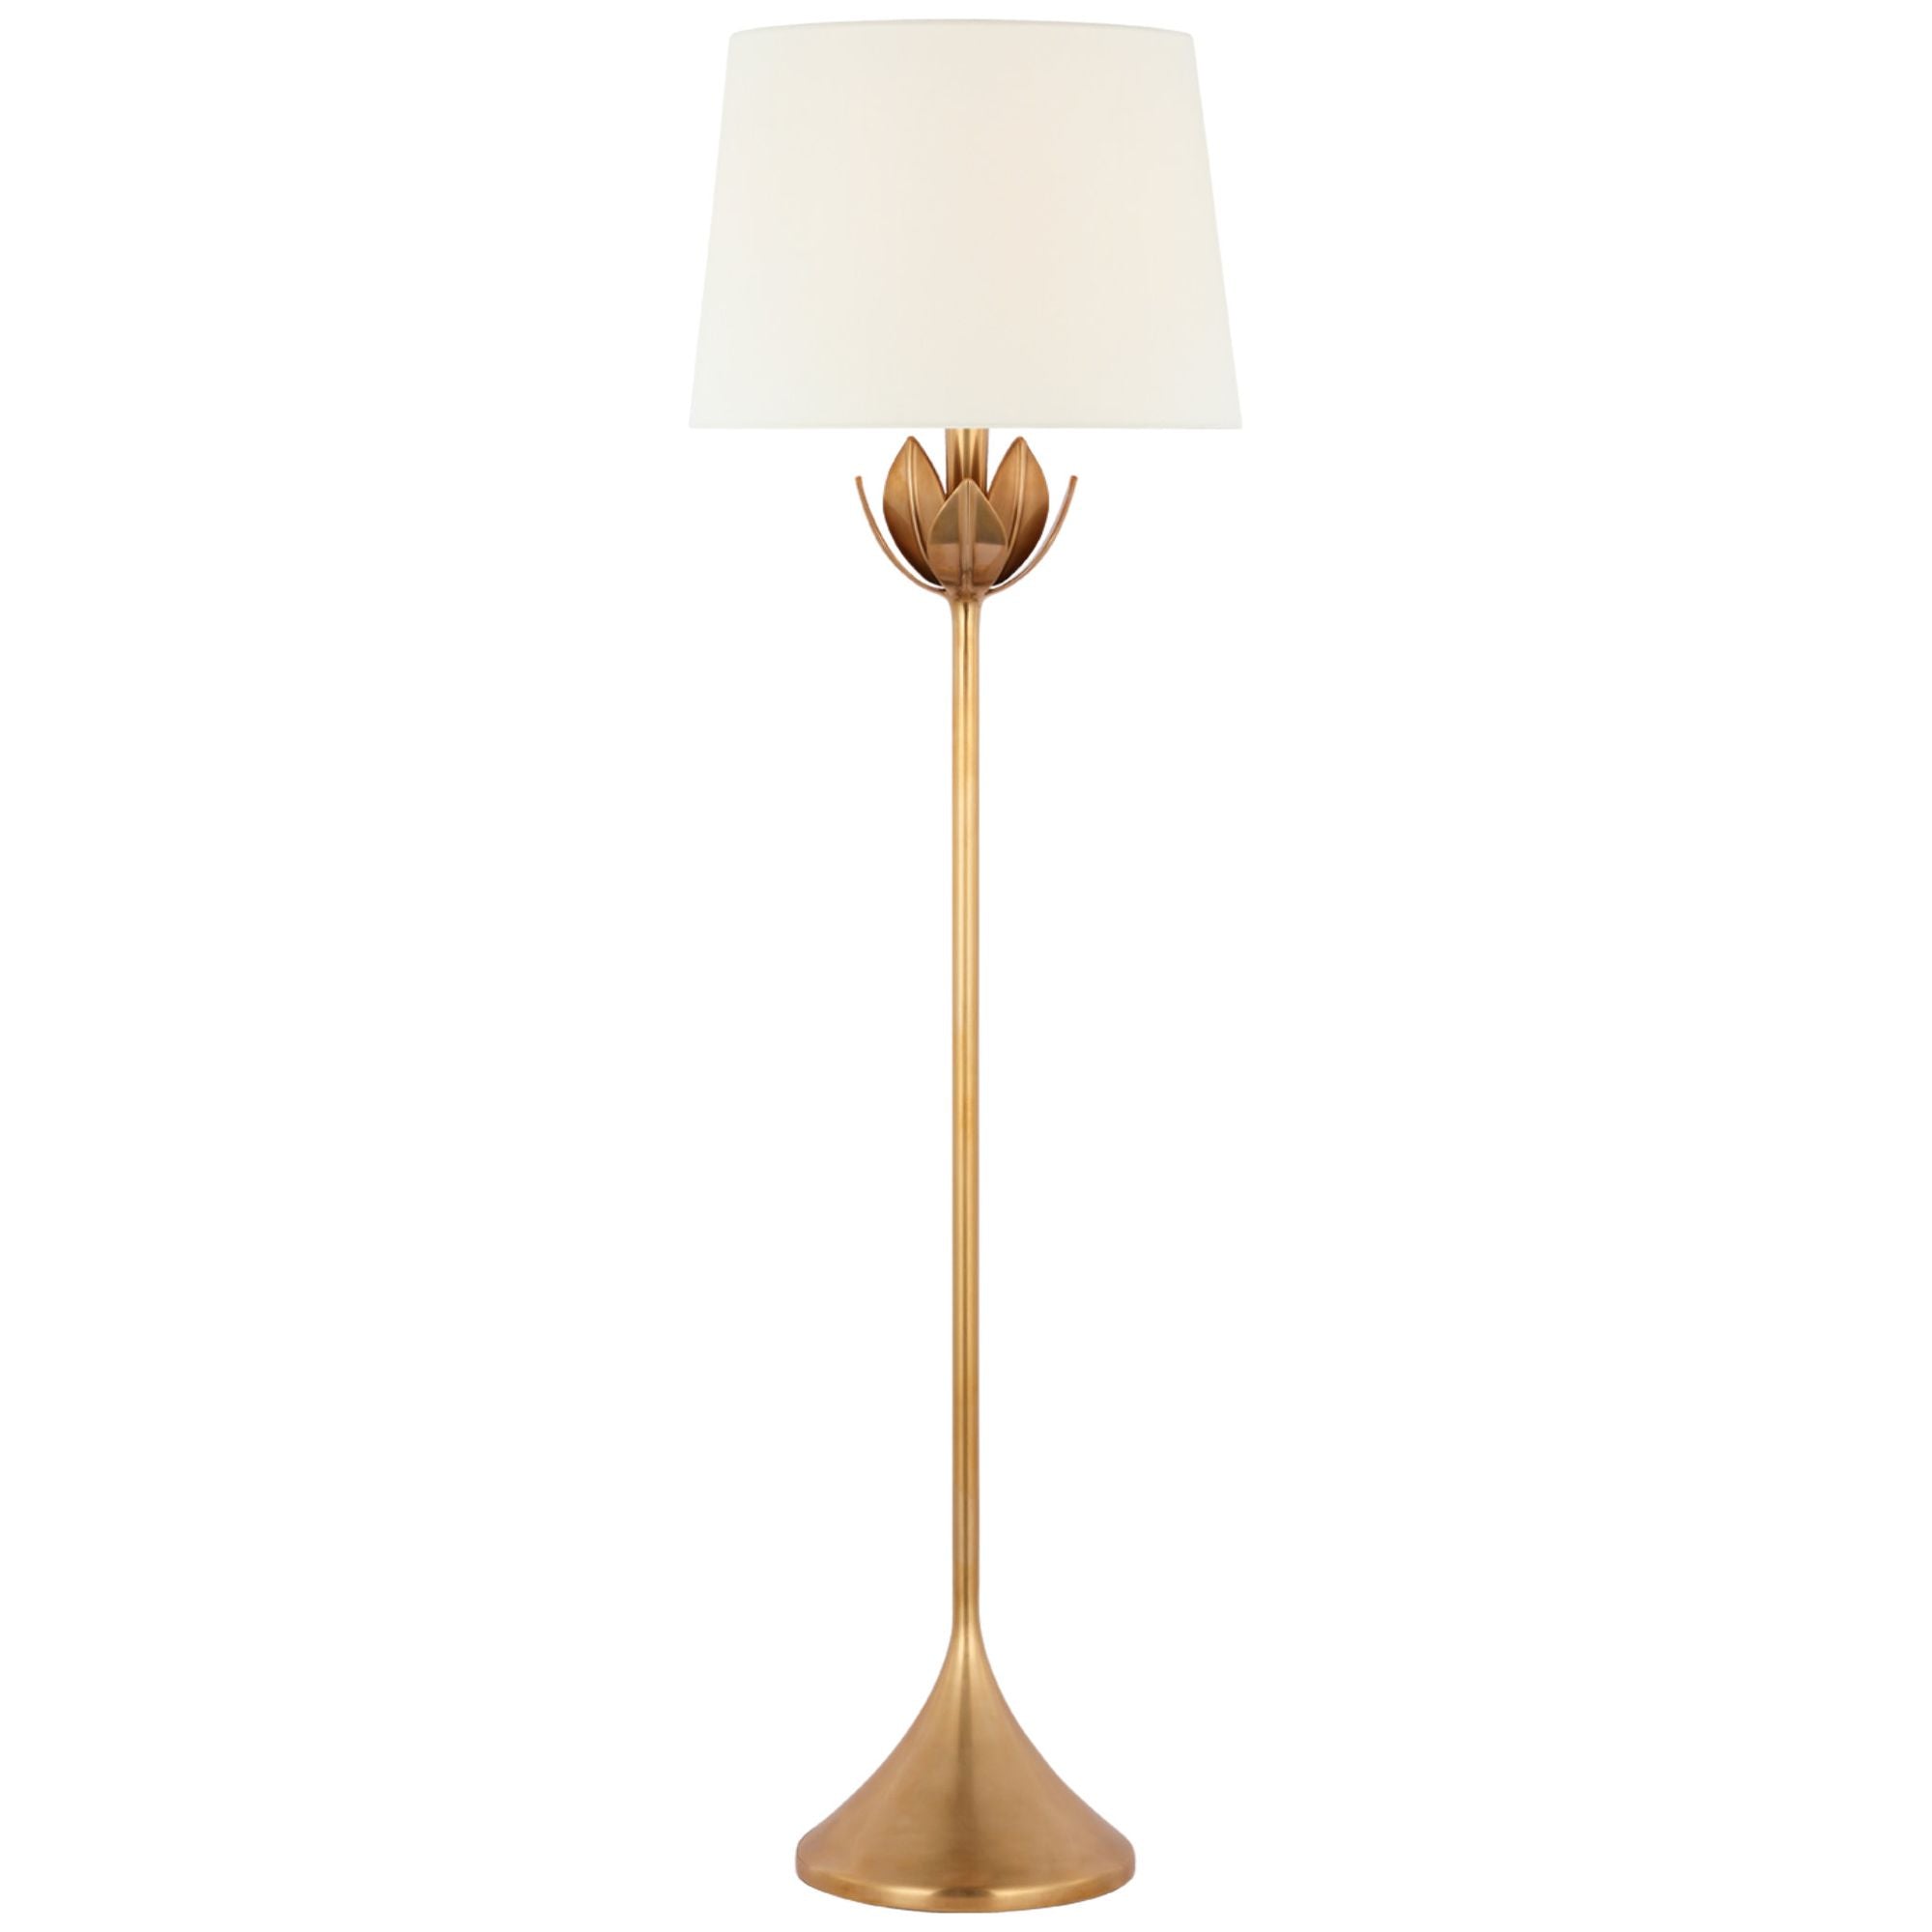 Julie Neill Alberto Large Floor Lamp in Antique-Burnished Brass with Linen Shade